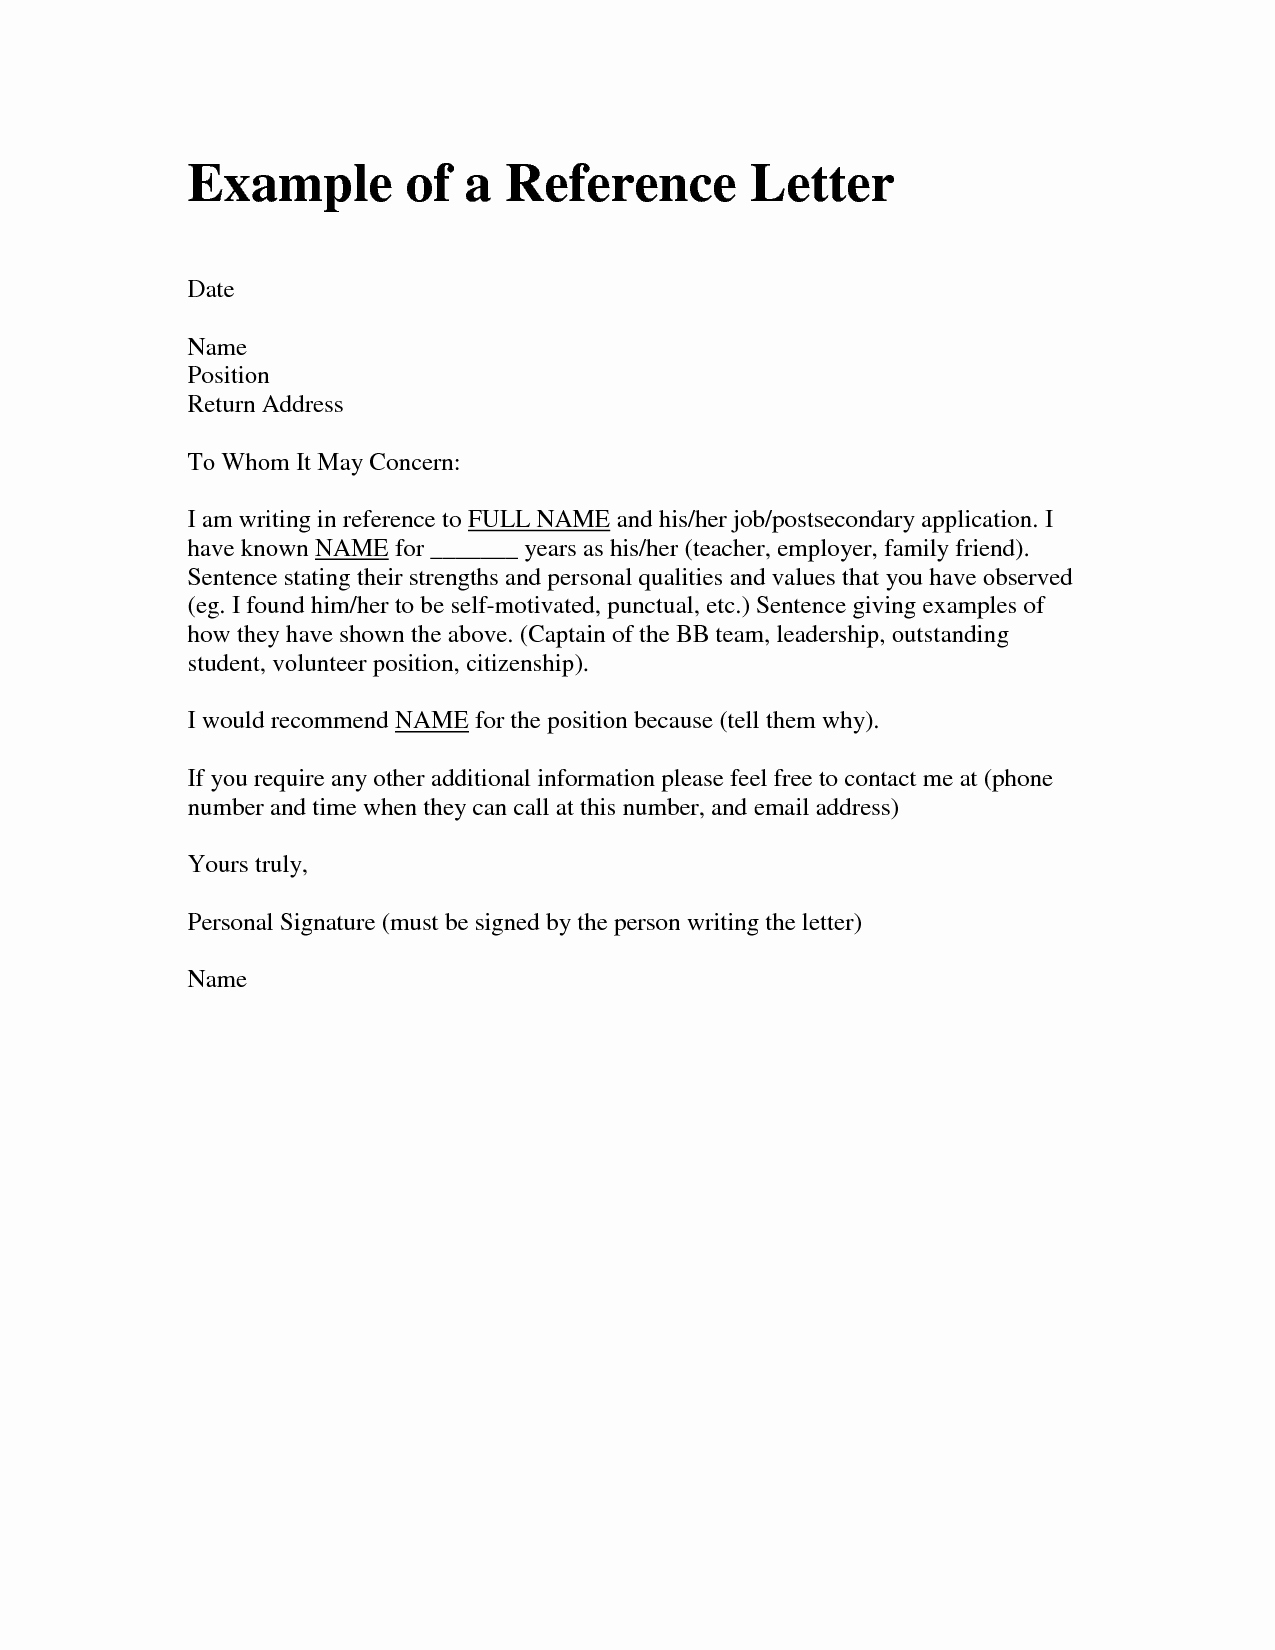 Letter Of Recommendation for Friend Awesome Letter Re Mendation Template for Friend Letter Art